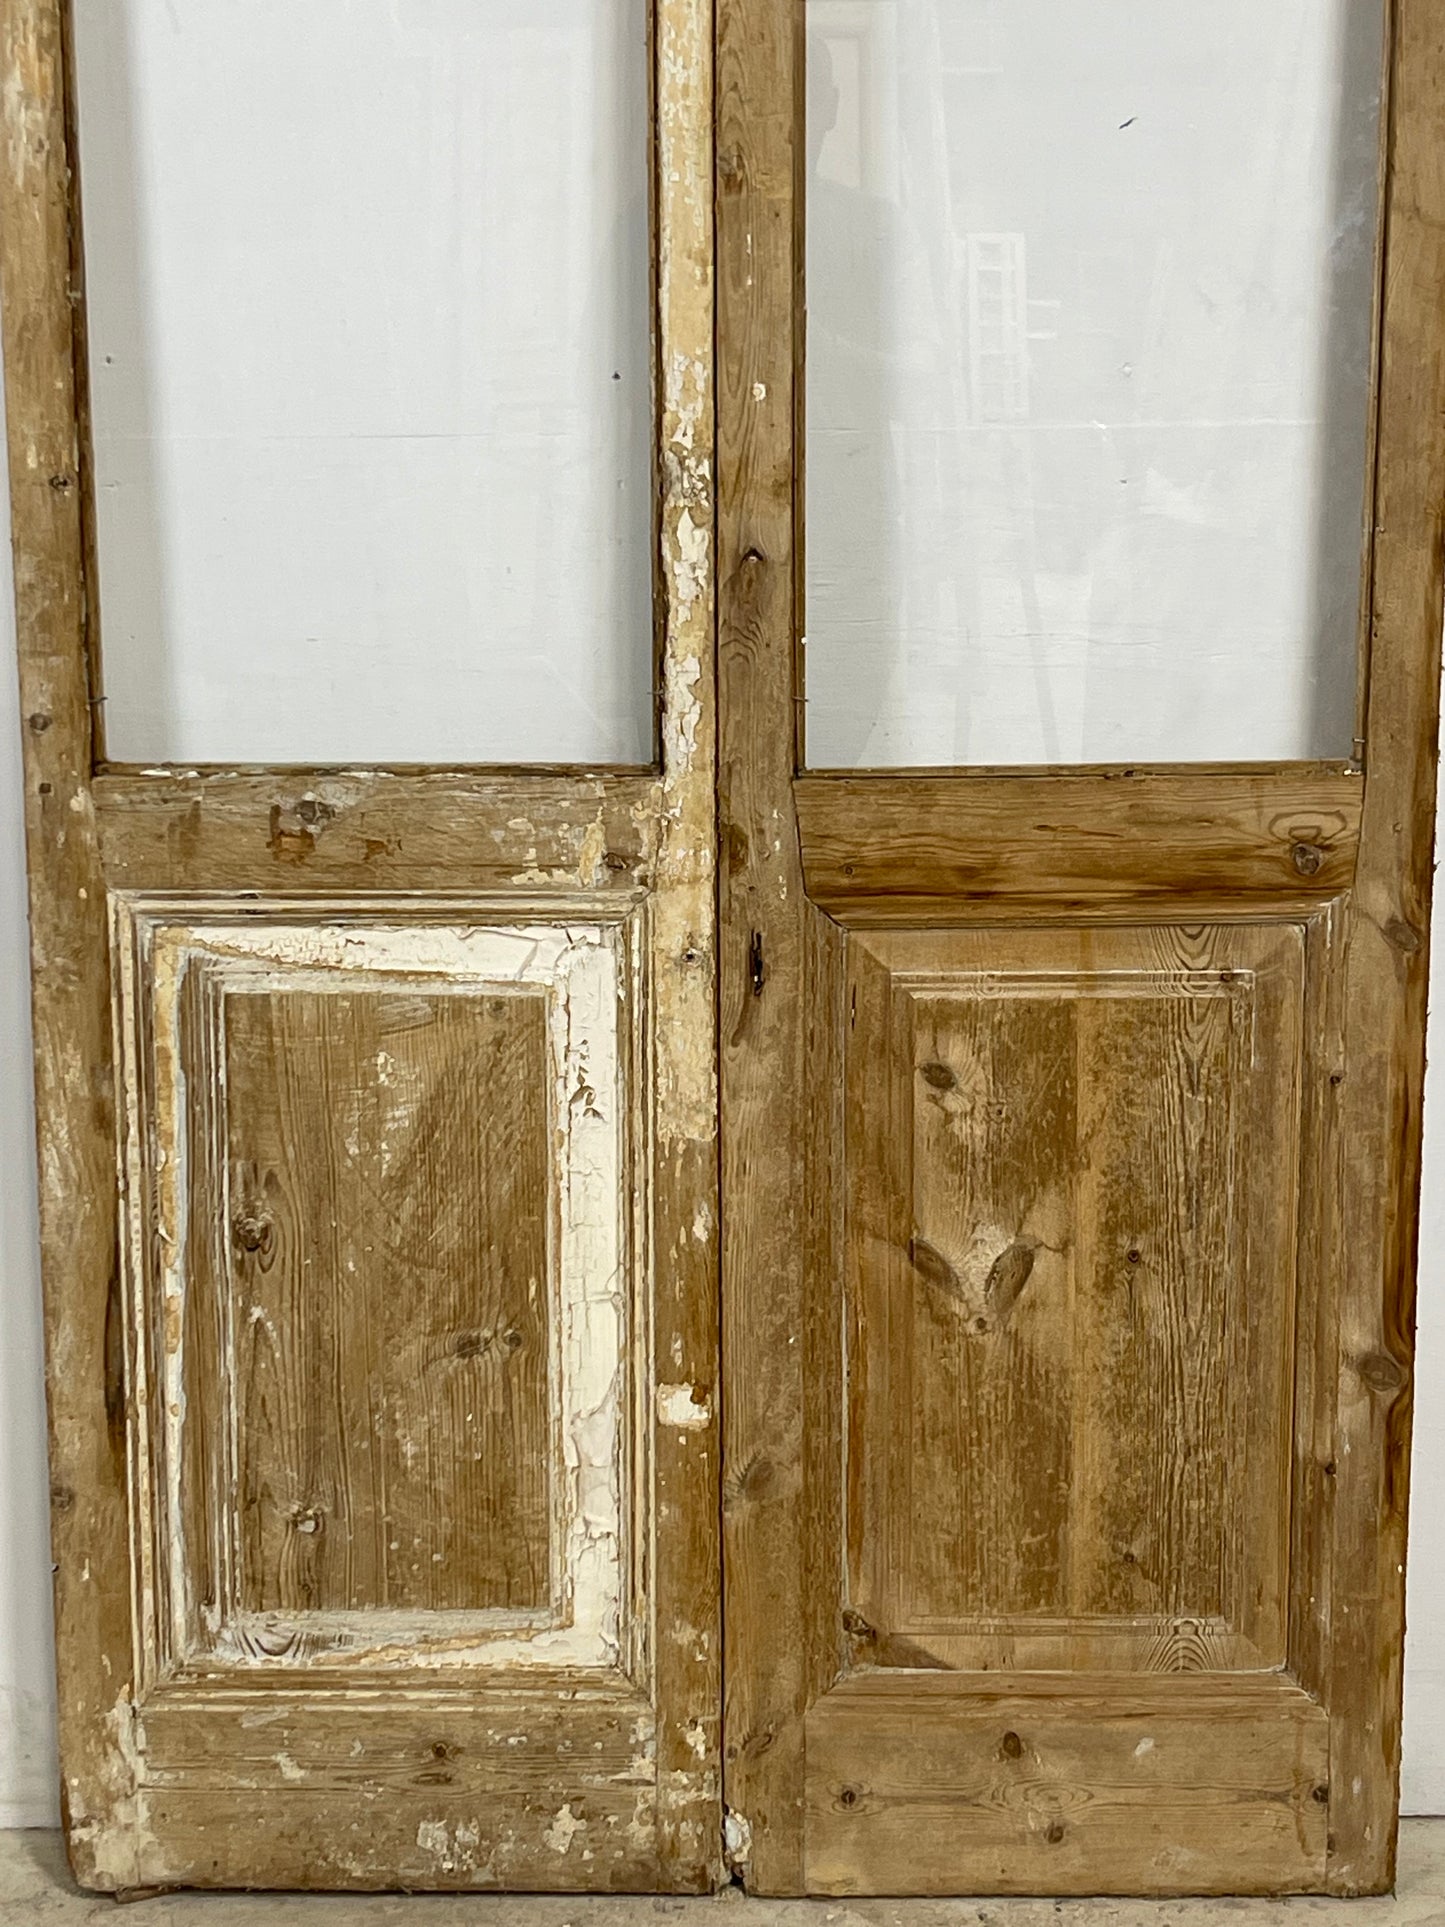 Antique French panel doors with glass (100x44) L387